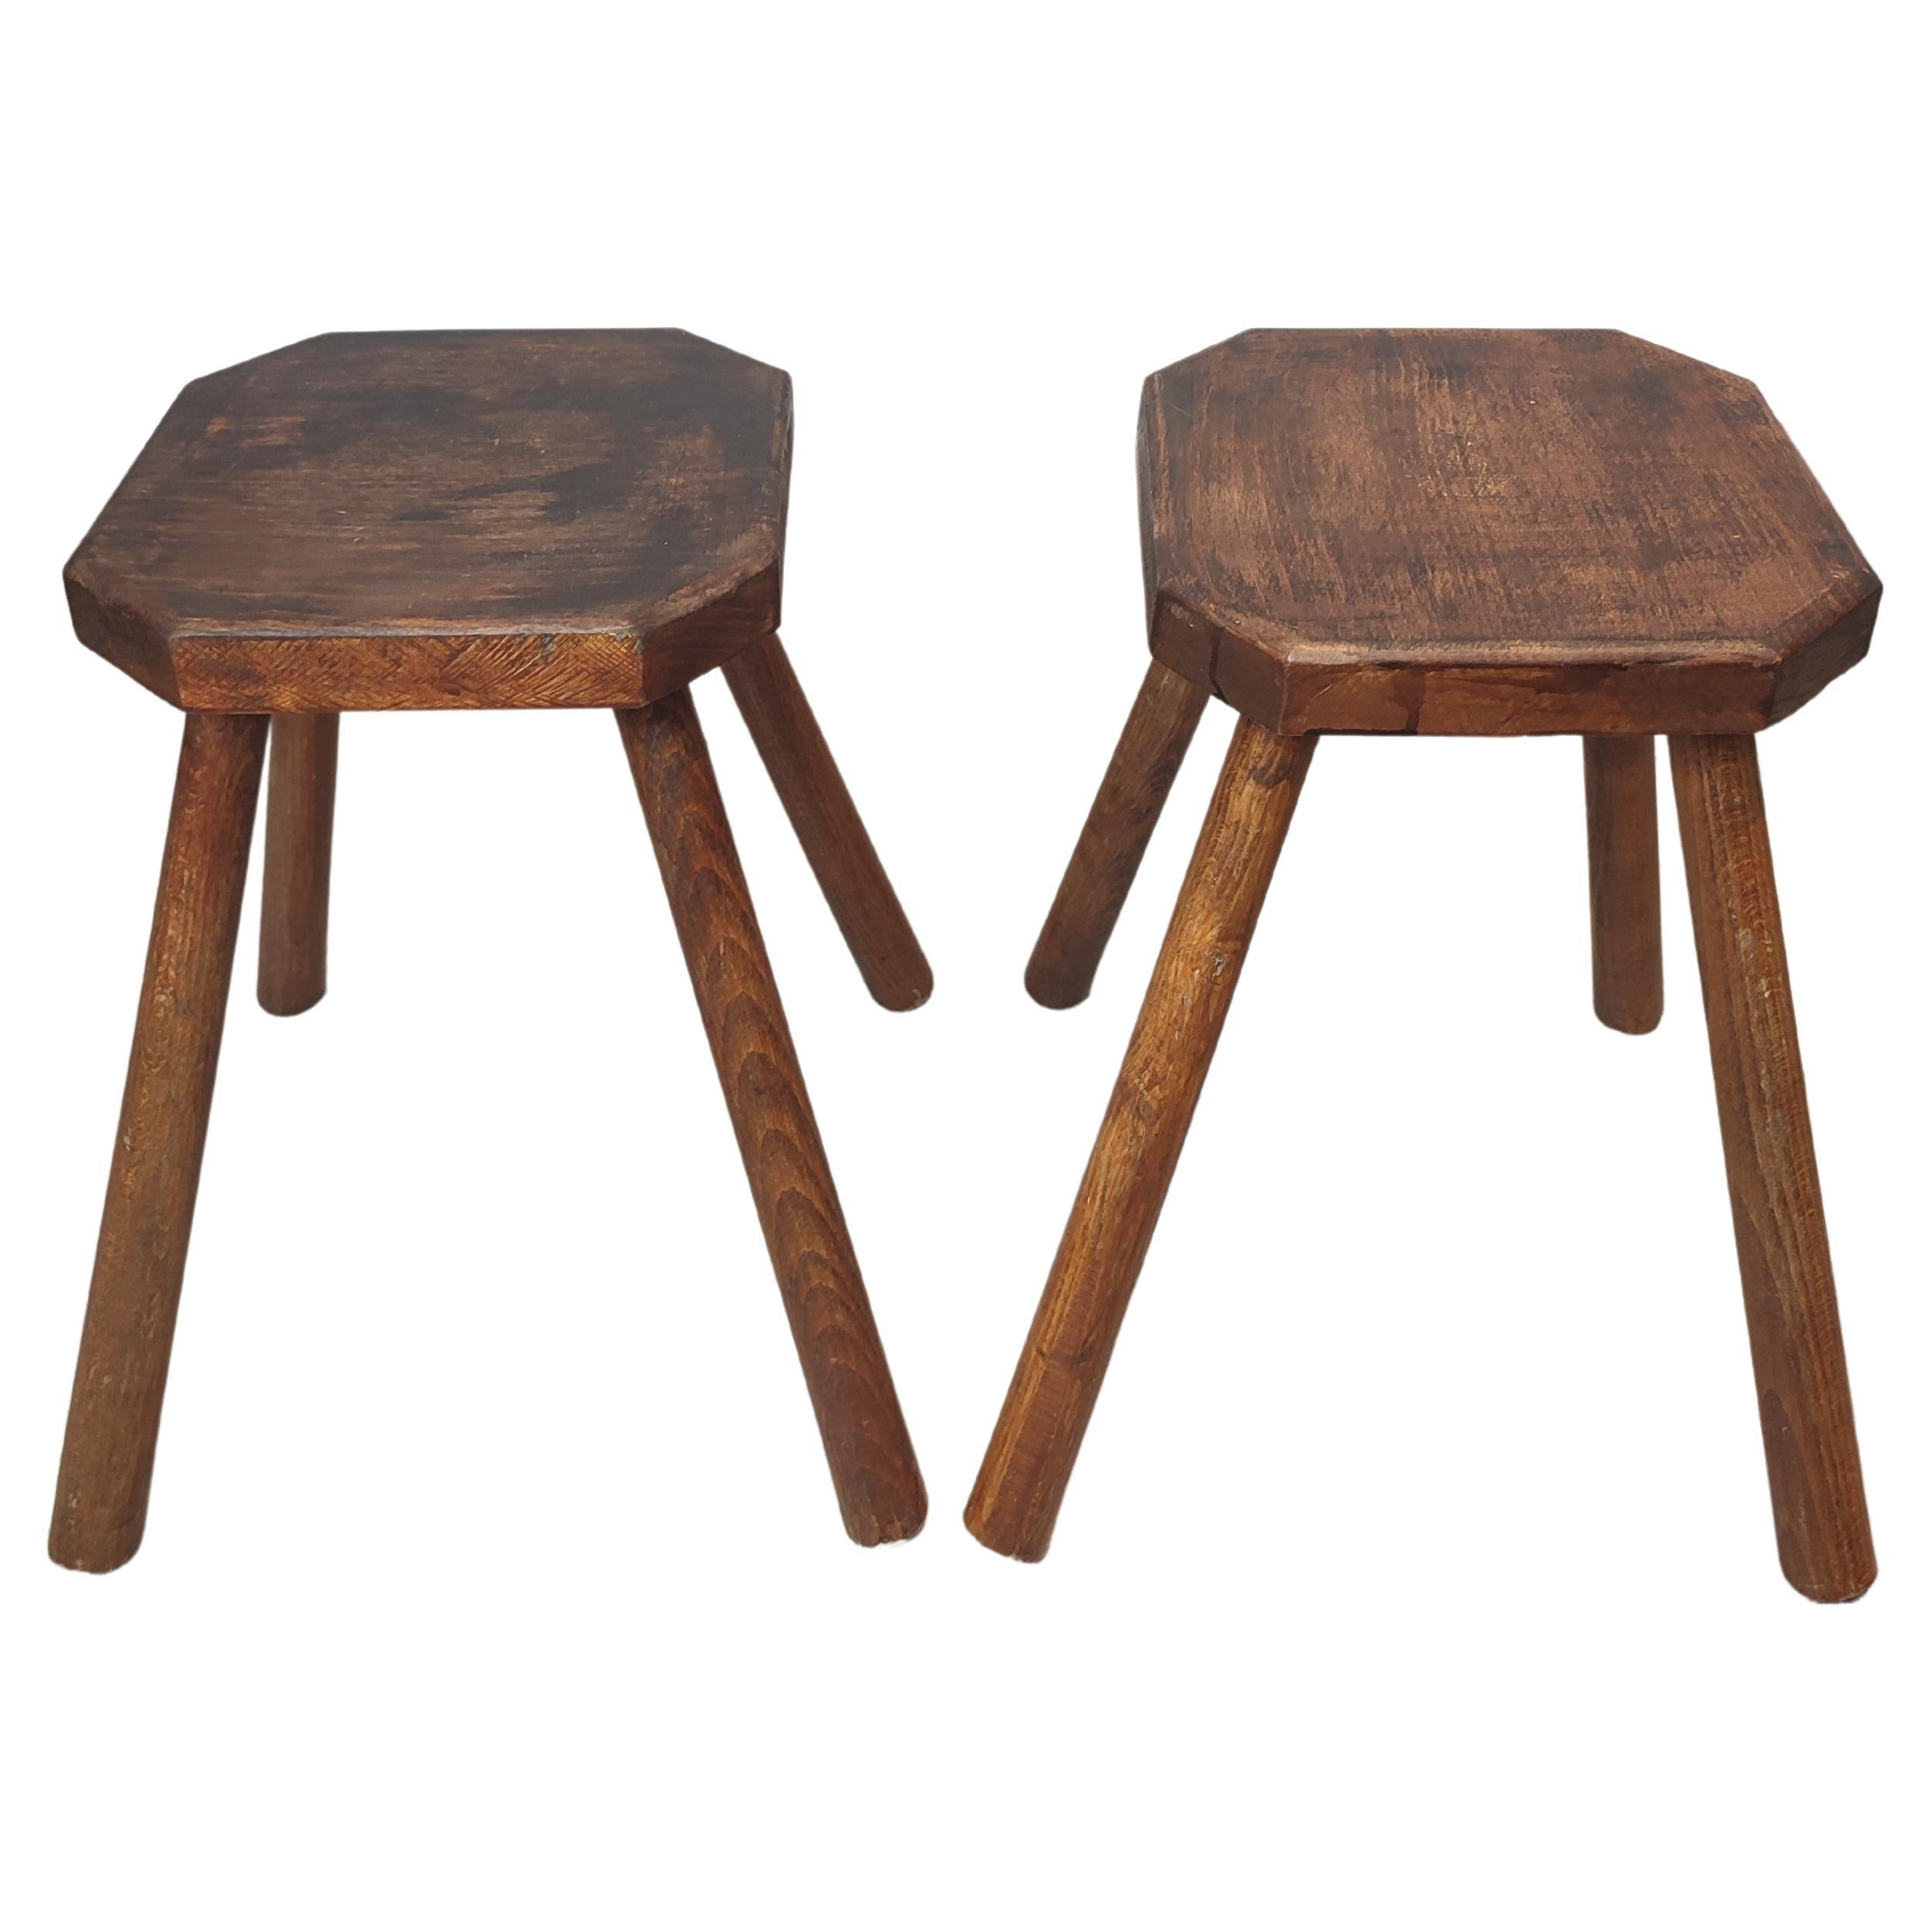 Pair of Primitive Stools For Sale